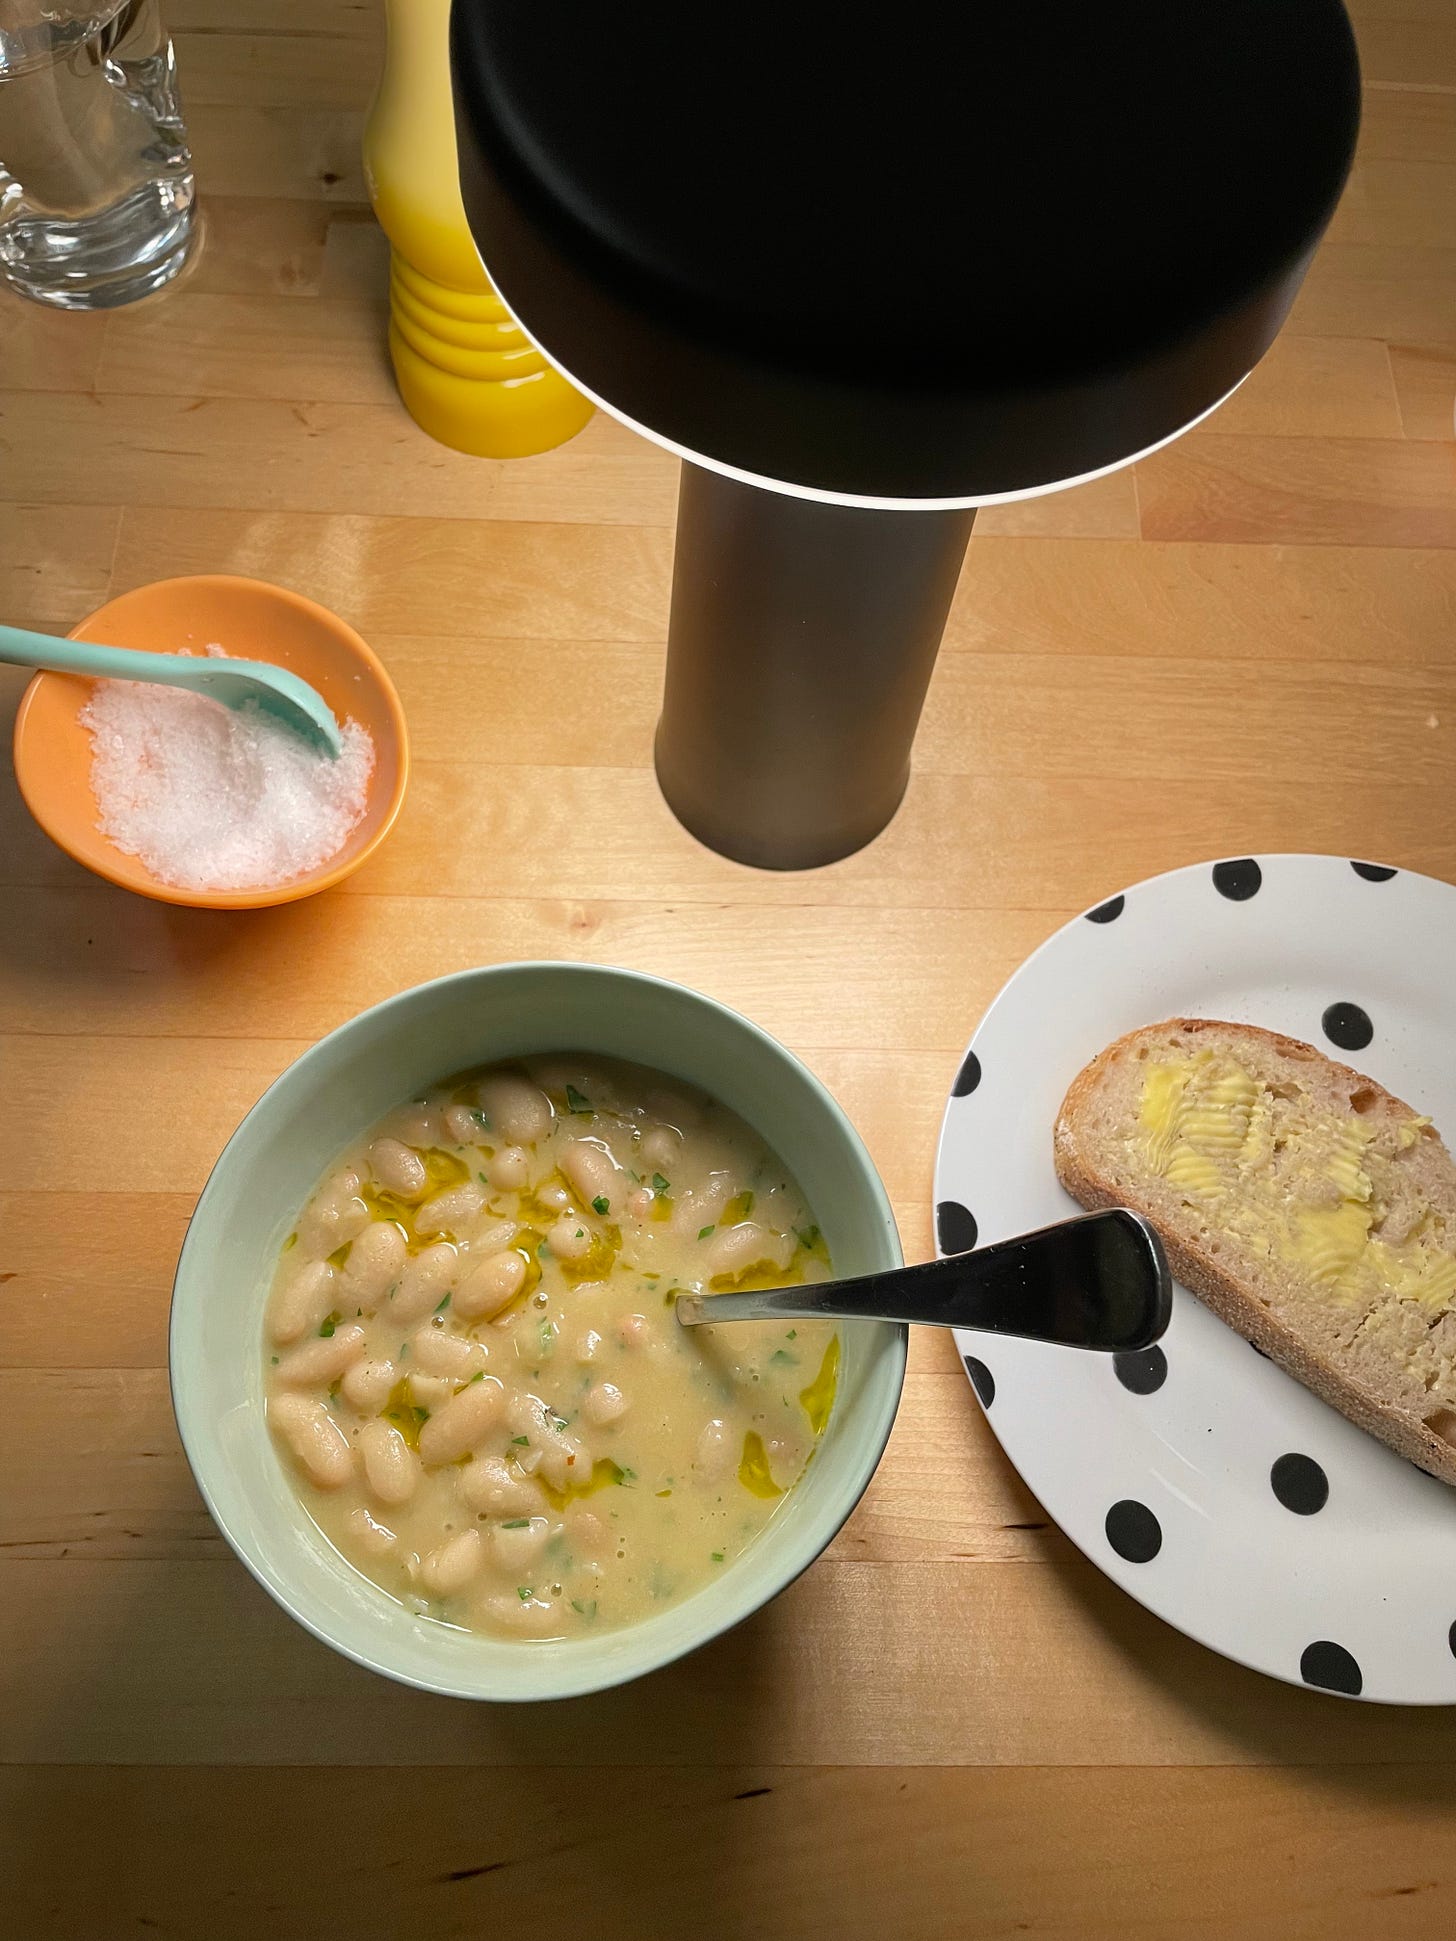 Green bowl filled with cannellini bean soup, a buttered slice of bread and bowl of sea salt nearby.